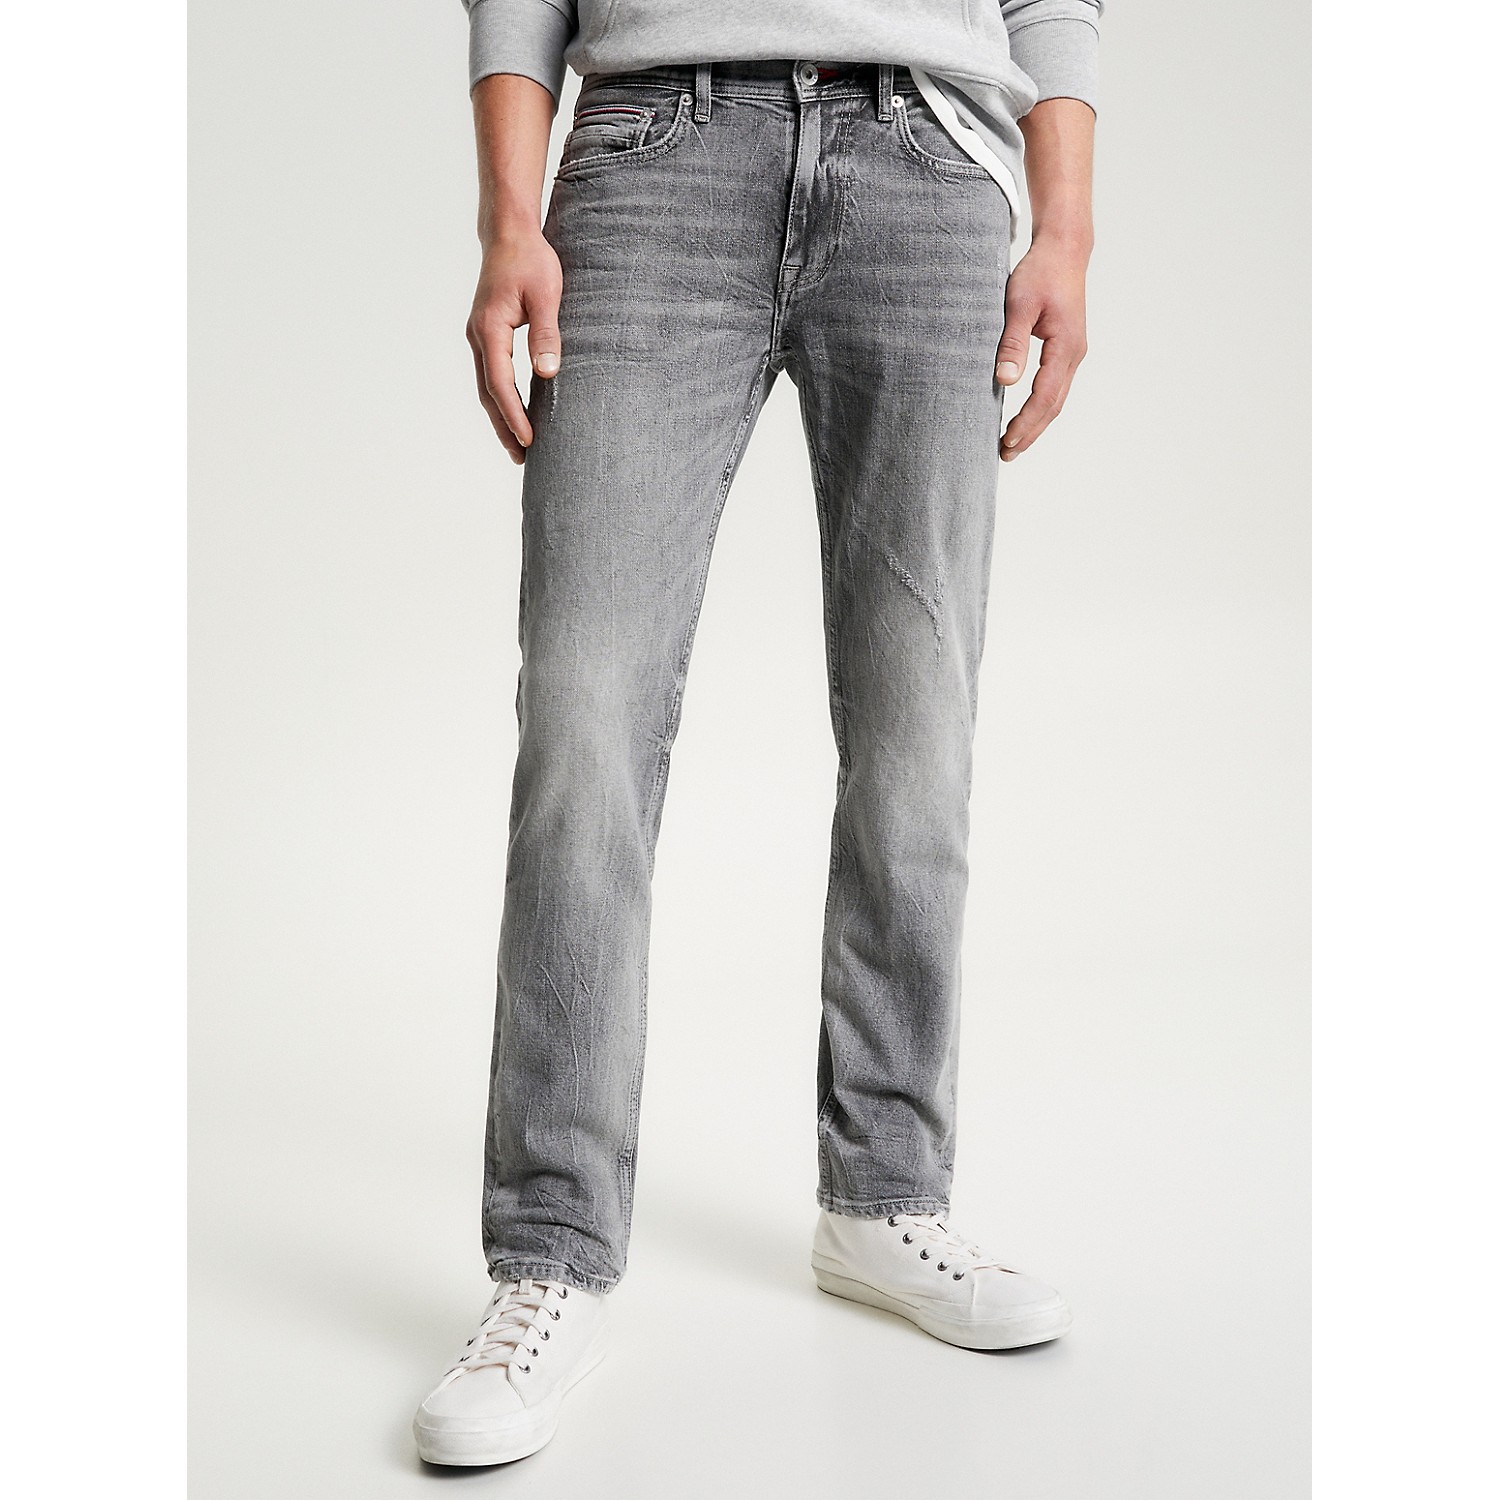 TOMMY HILFIGER Straight Fit Gray Wash Jean